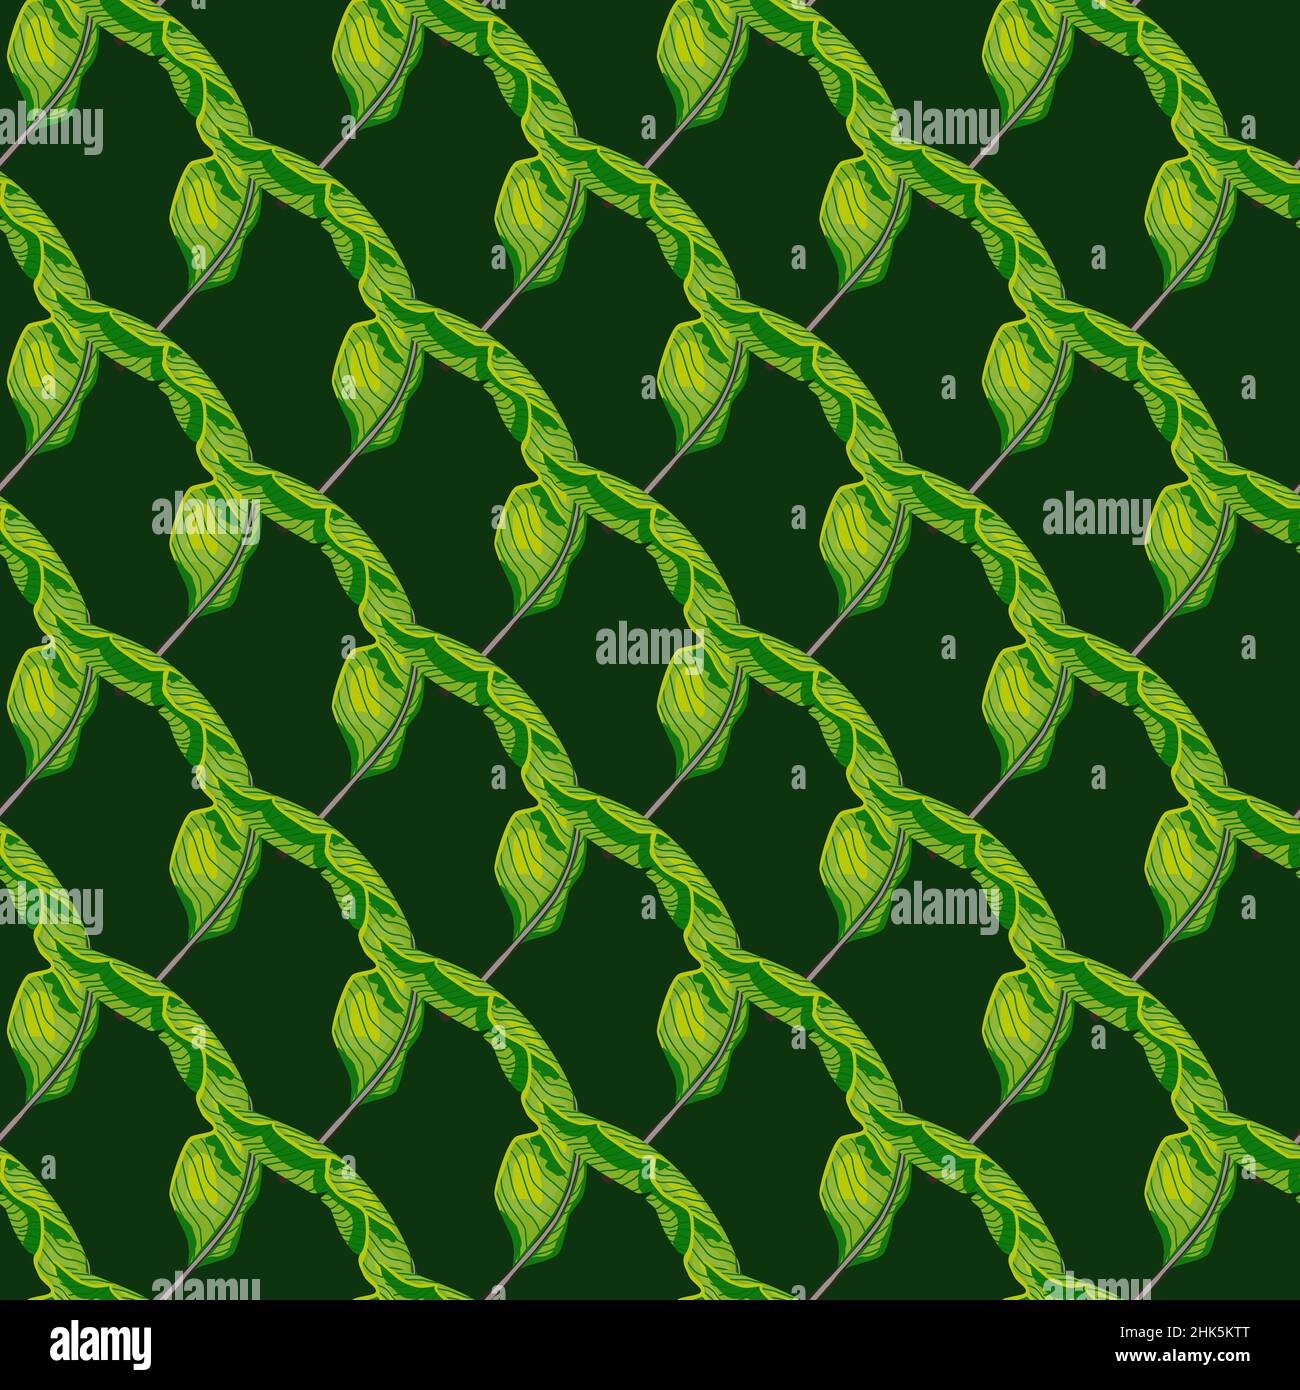 Diagonal green tropic palm shapes seamless doodle pattern. Dark background. Abstract print. Vector illustration for seasonal textile prints, fabric, b Stock Vector